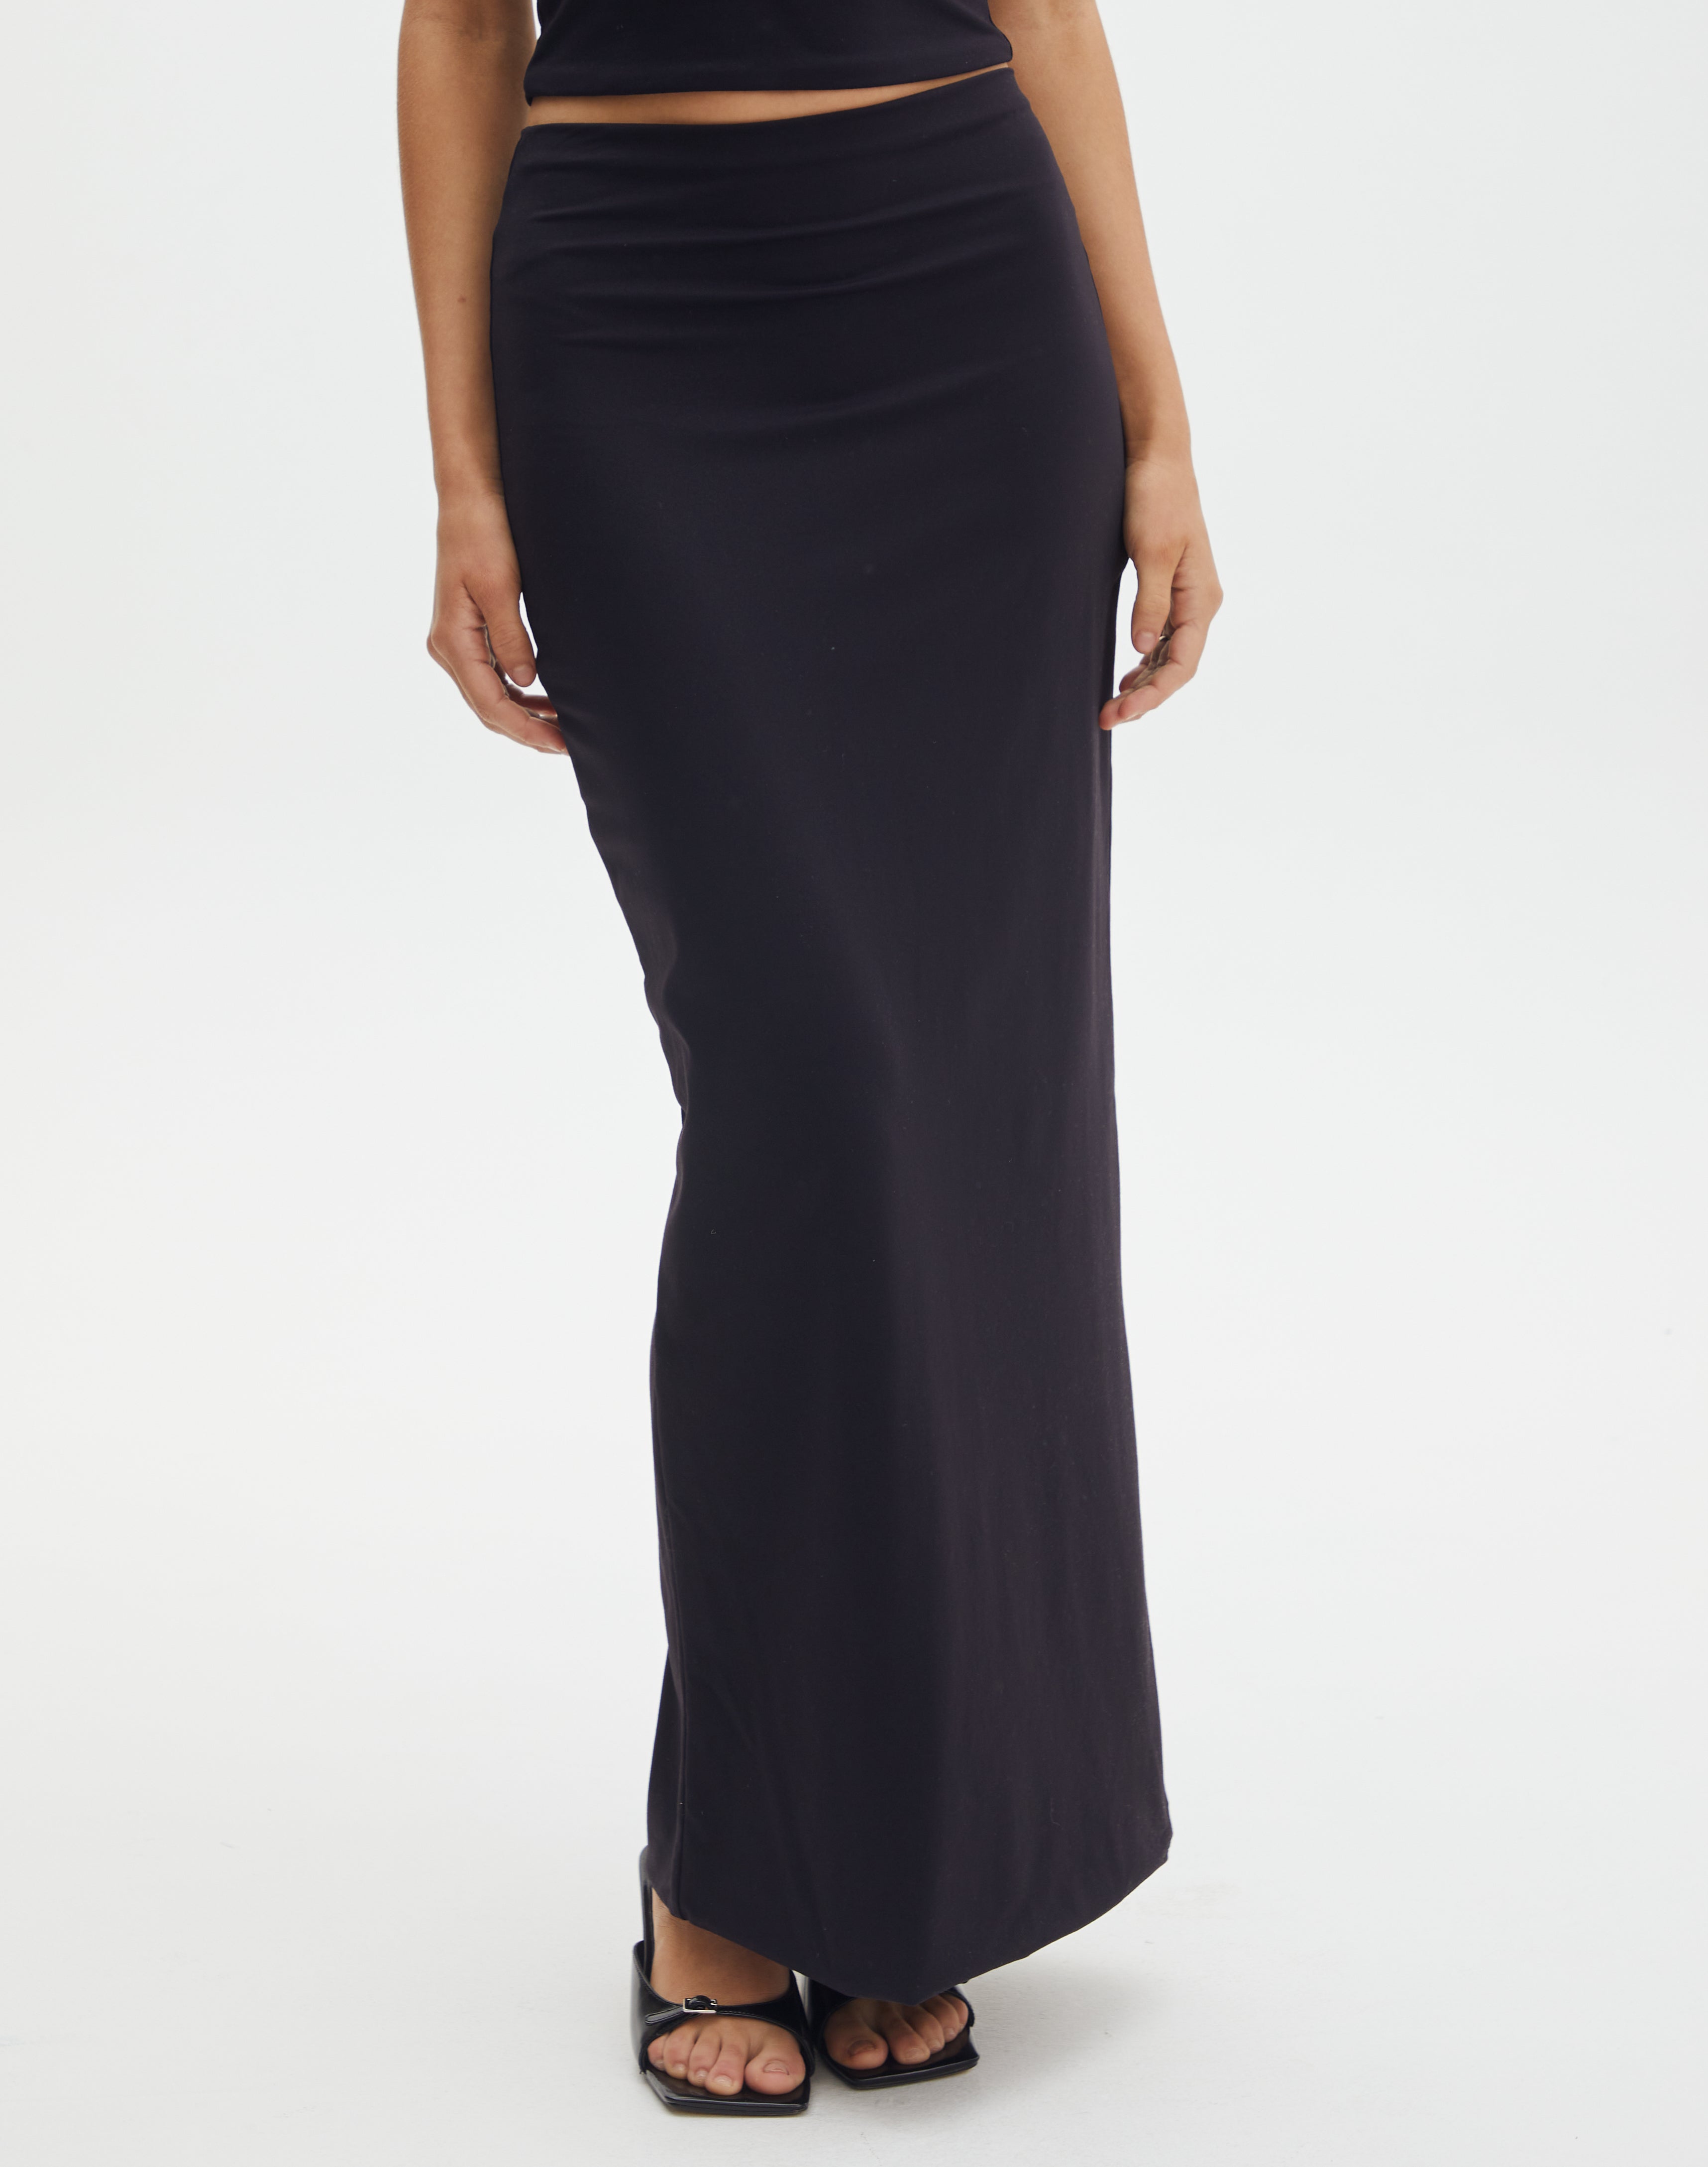 Supersoft Slim-Fit Maxi Skirt